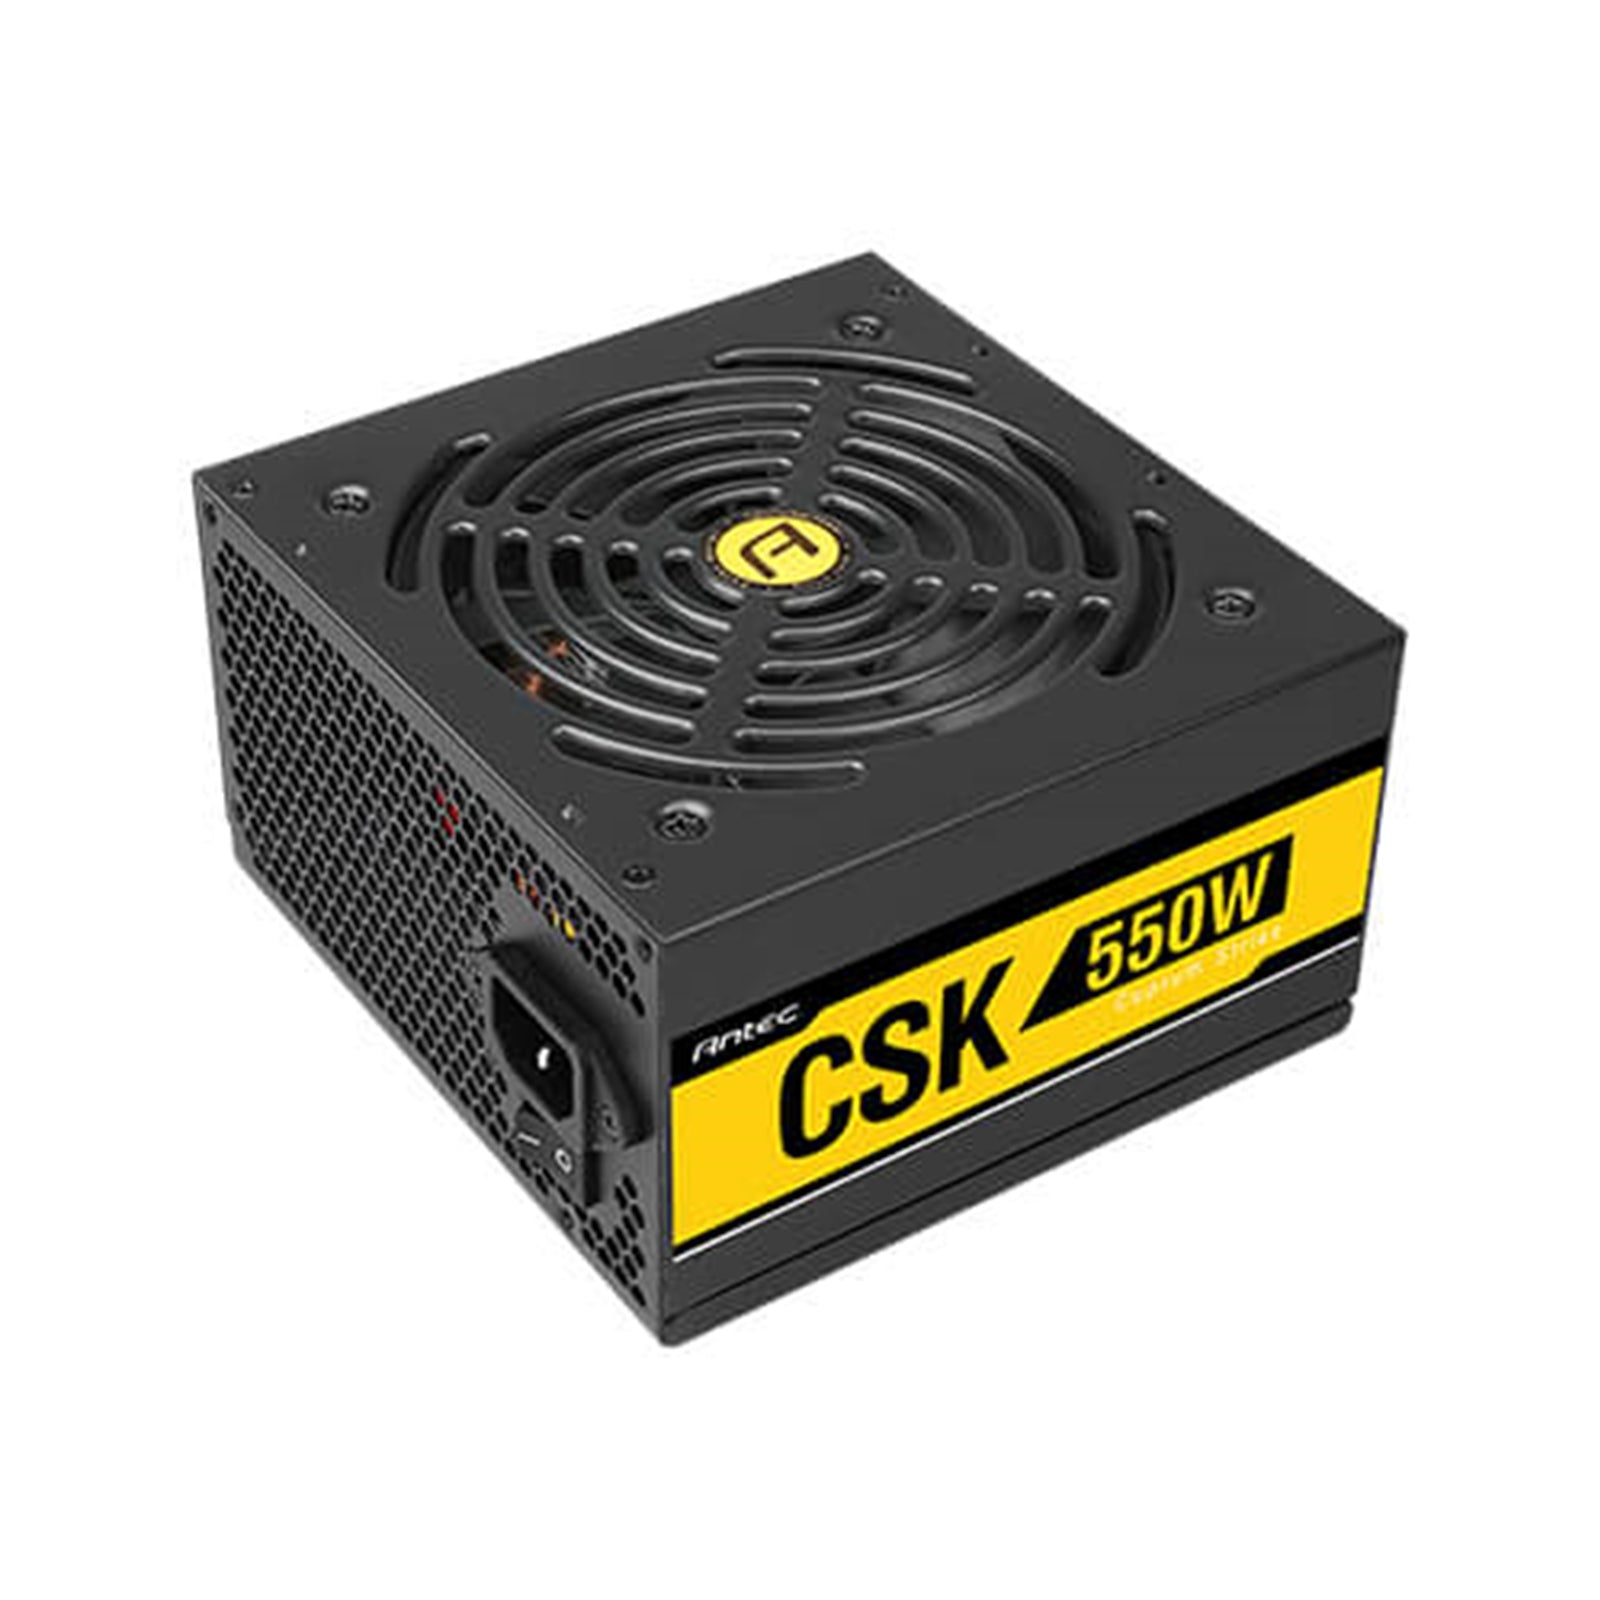 Antec CSK550 550W Power Supply 80+ Bronze Certified, Fully Wired, with Silent Fan